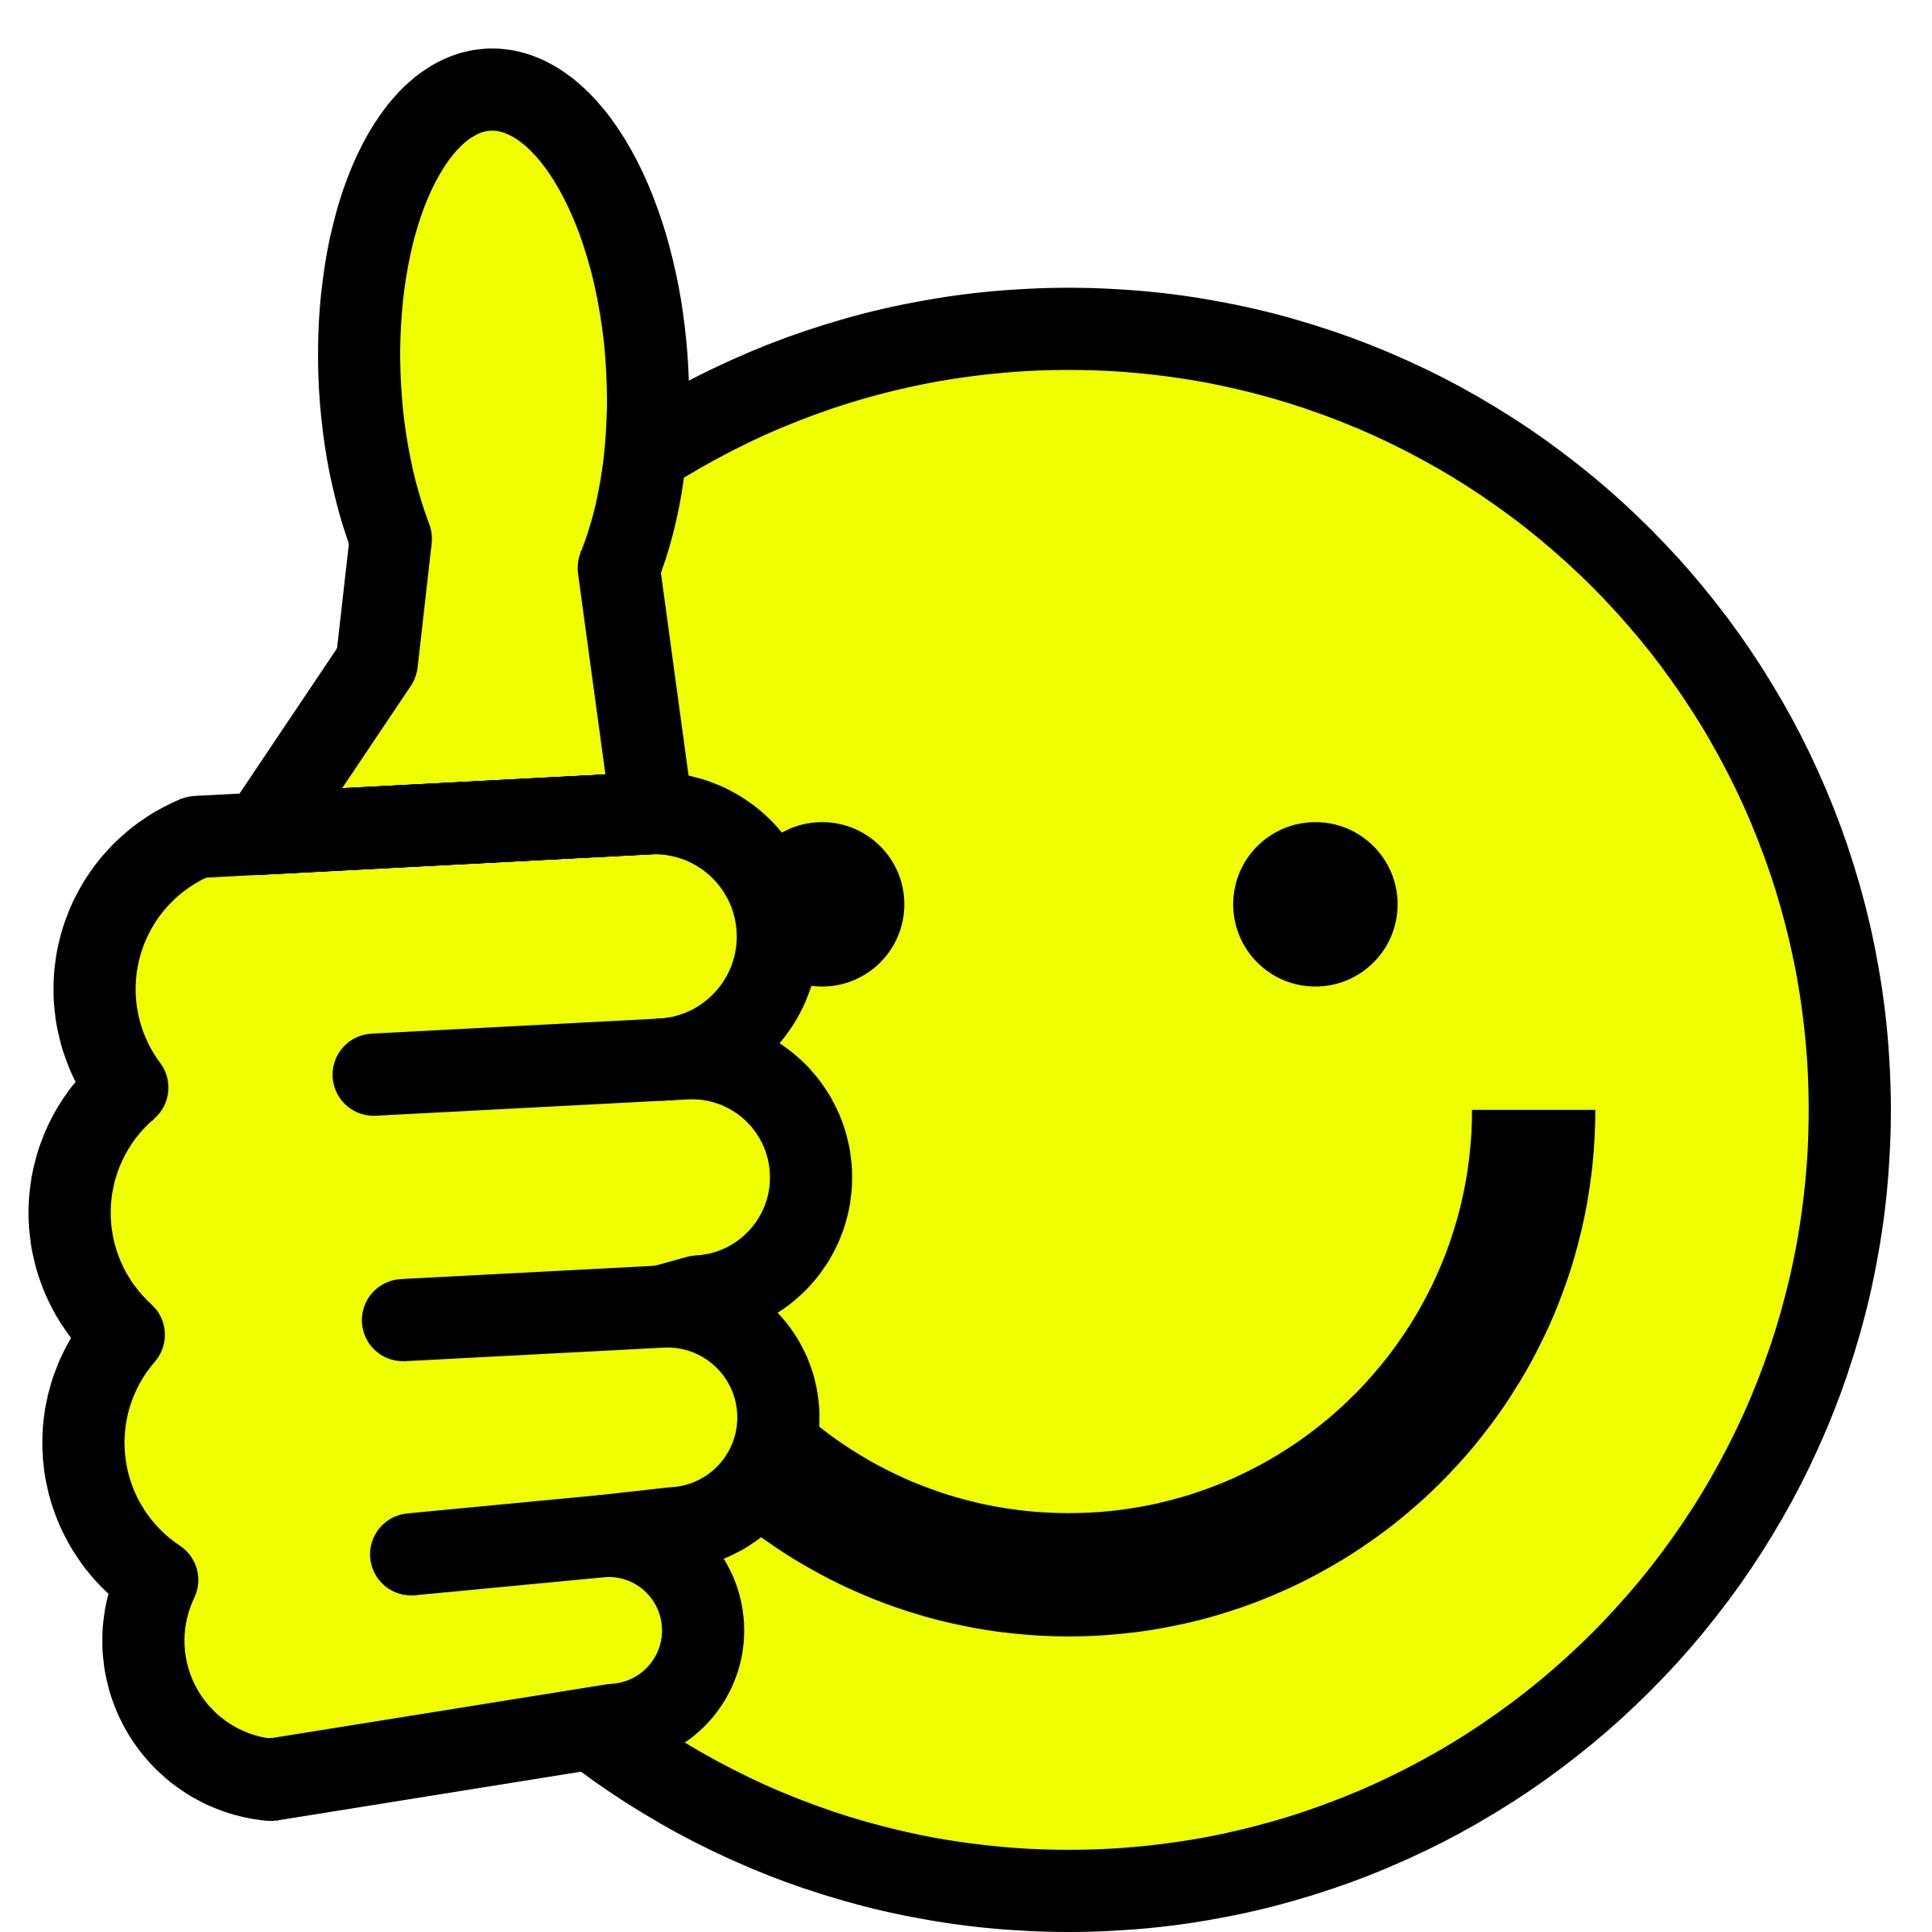 thumbs up clipart free download - photo #3